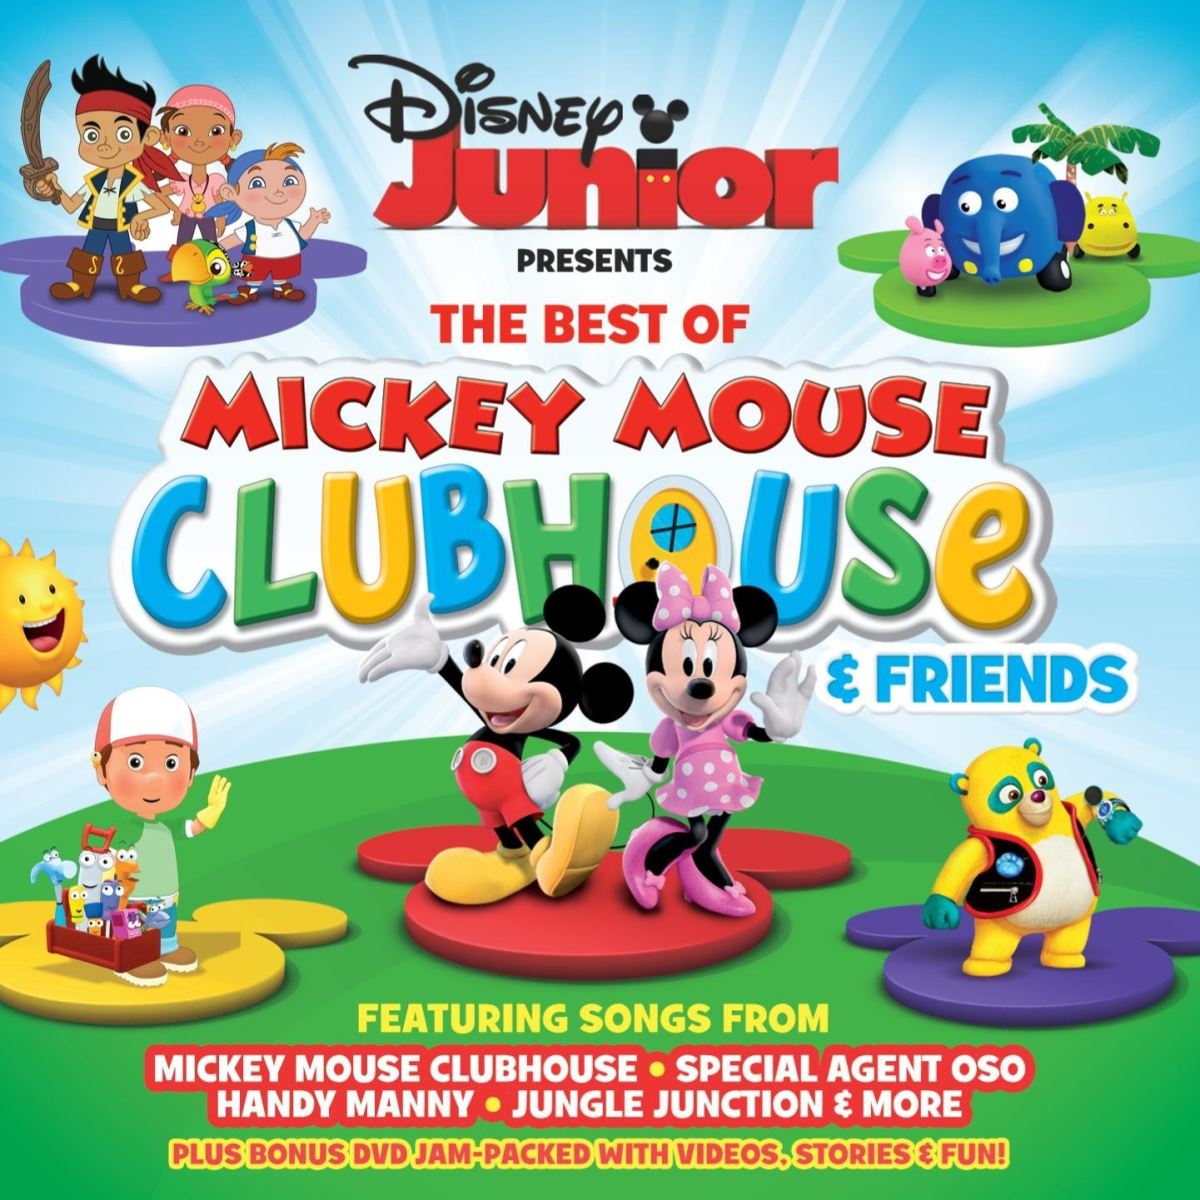 bo-dia-hoc-tieng-anh-The-Best-Of-Mickey-Mouse-Clubhouse-phat-trien-iq-cho-tre